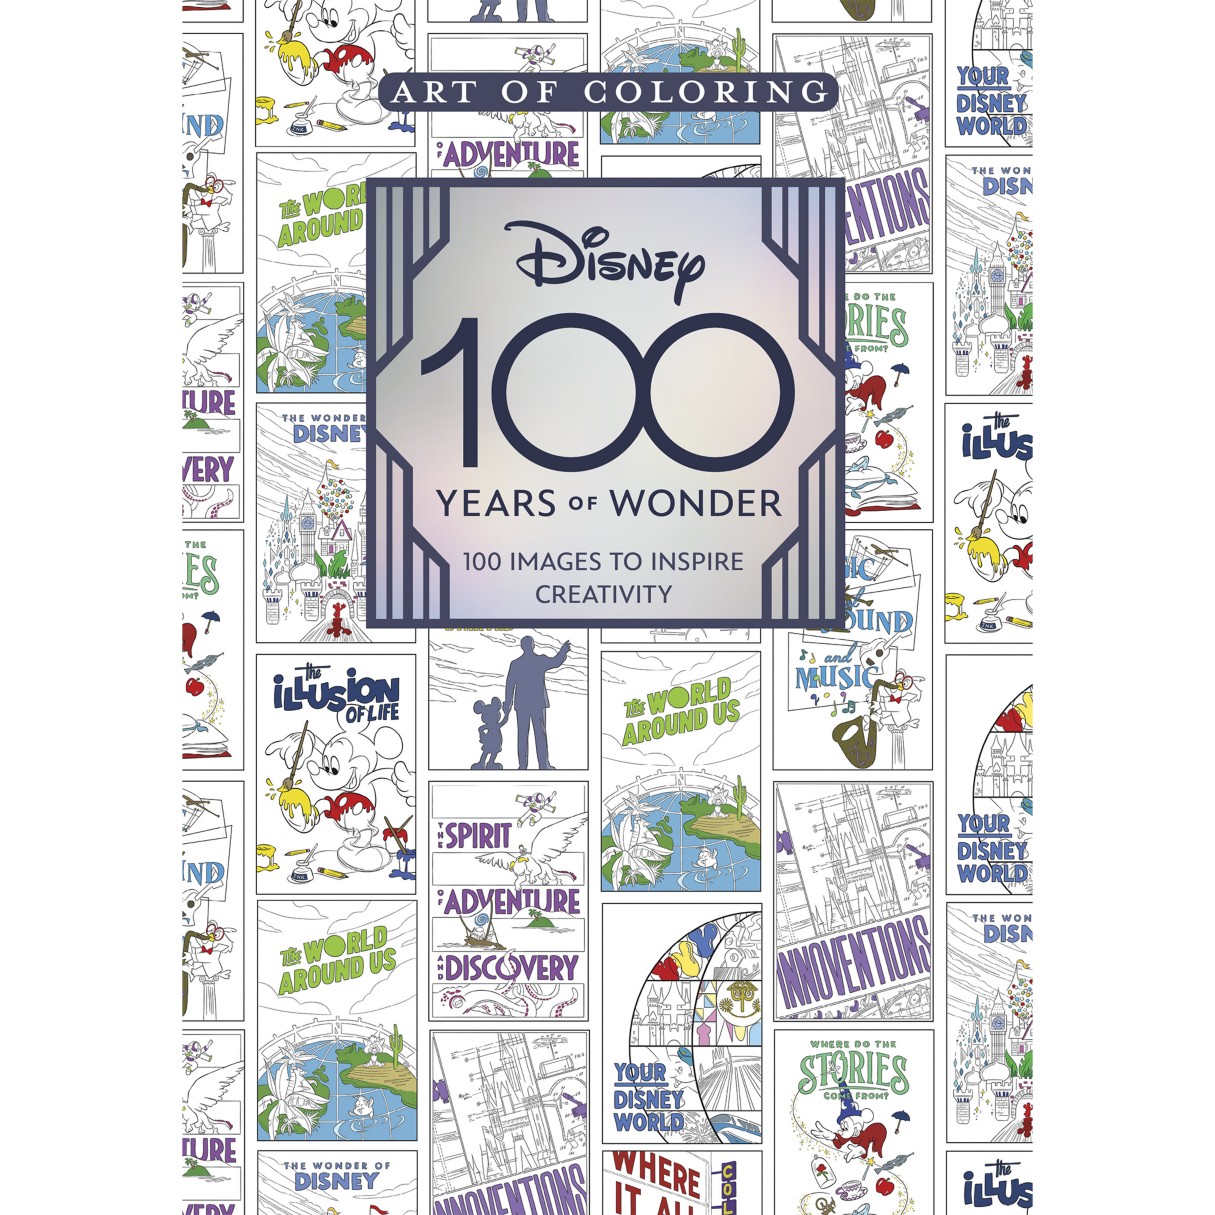 Art of Coloring: Disney 100 Years of Wonder – 100 Images to Inspire